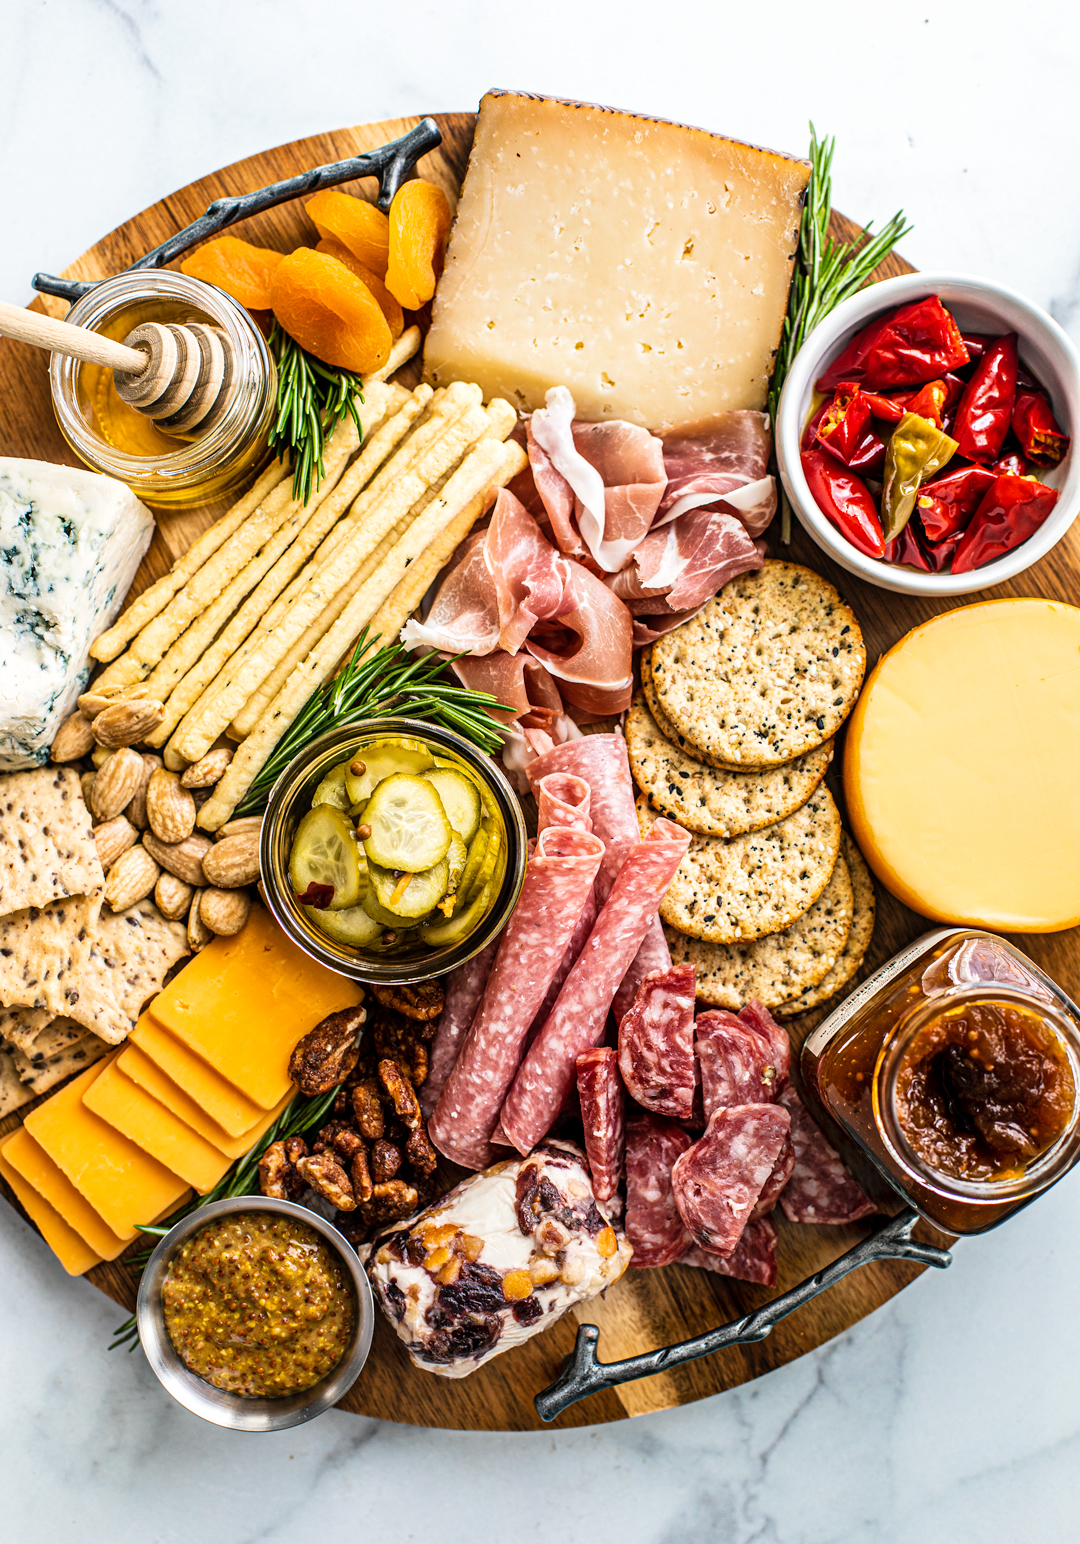 Overhead view of meat and cheese platter with nuts, fruits, jams, honey, etc.